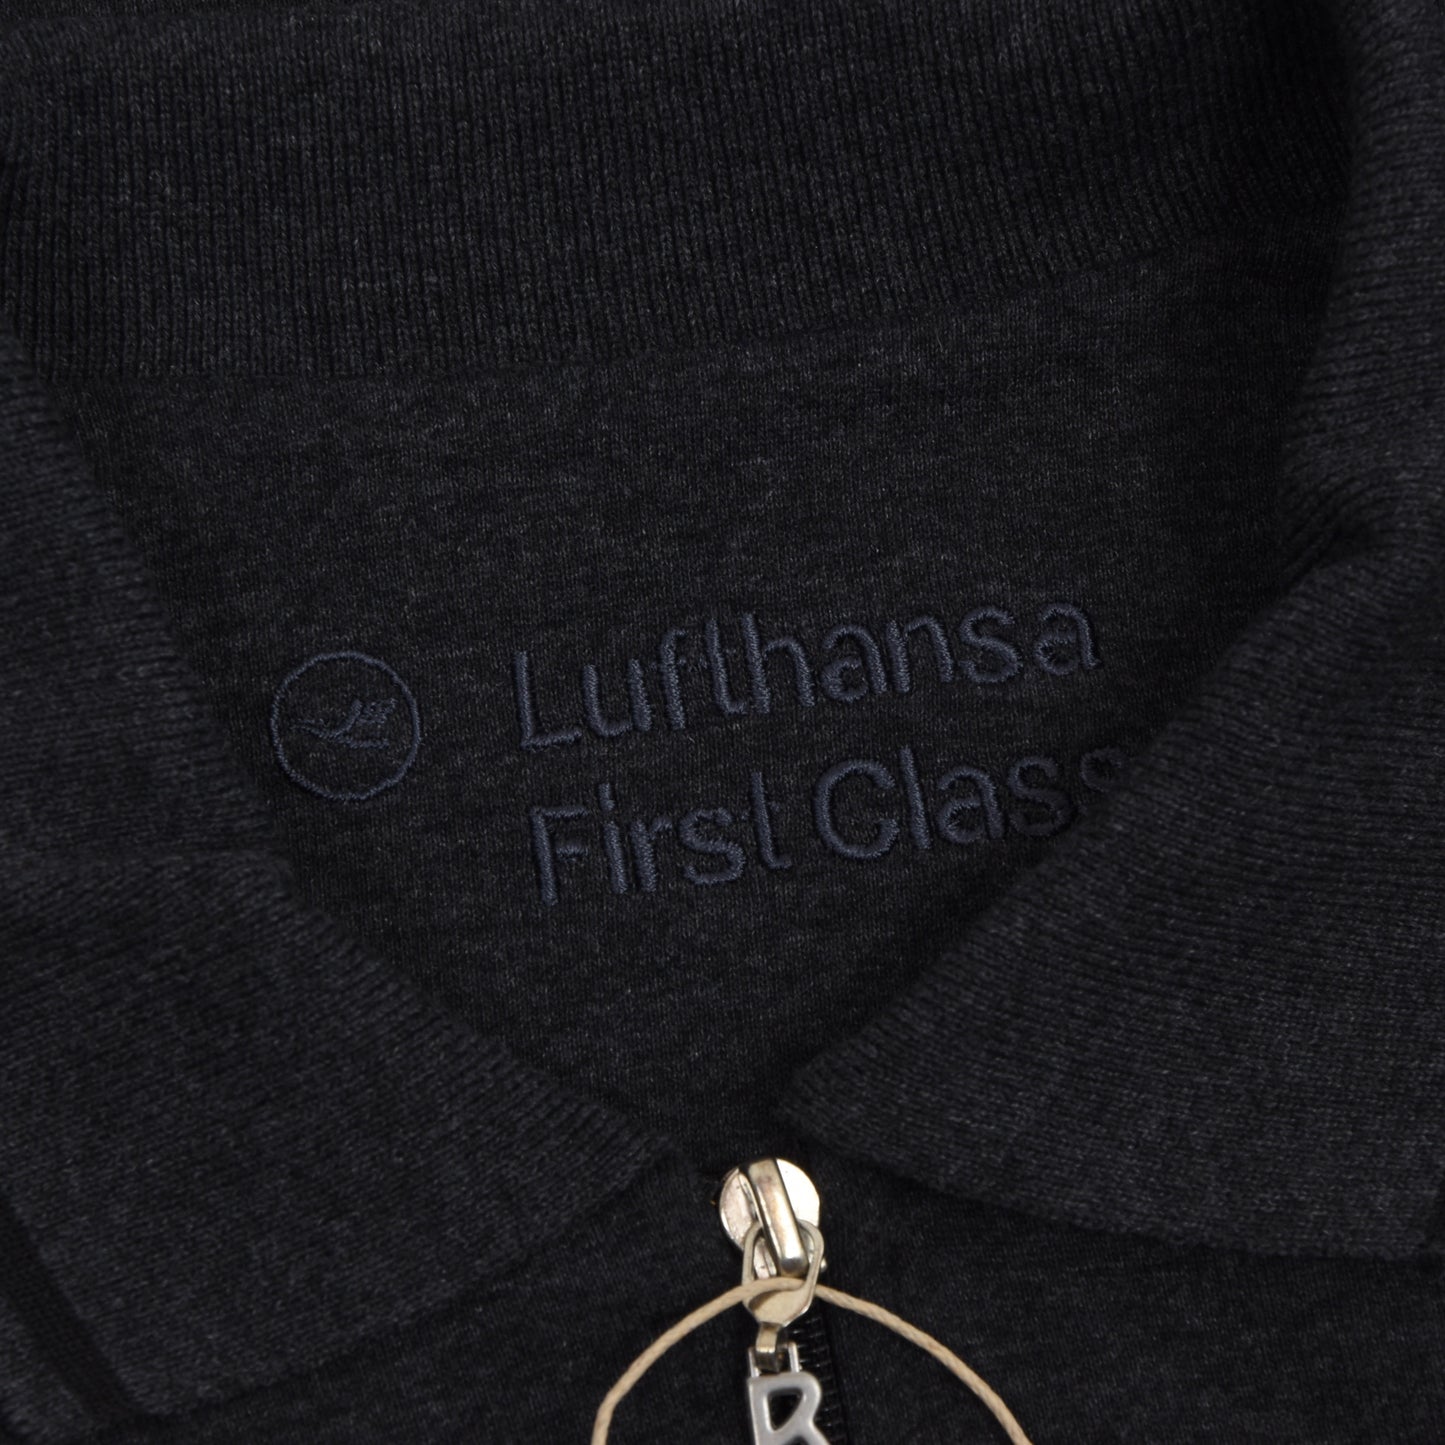 Bogner for Lufthansa First Class Cotton Pullover/Top Size XL - Grey